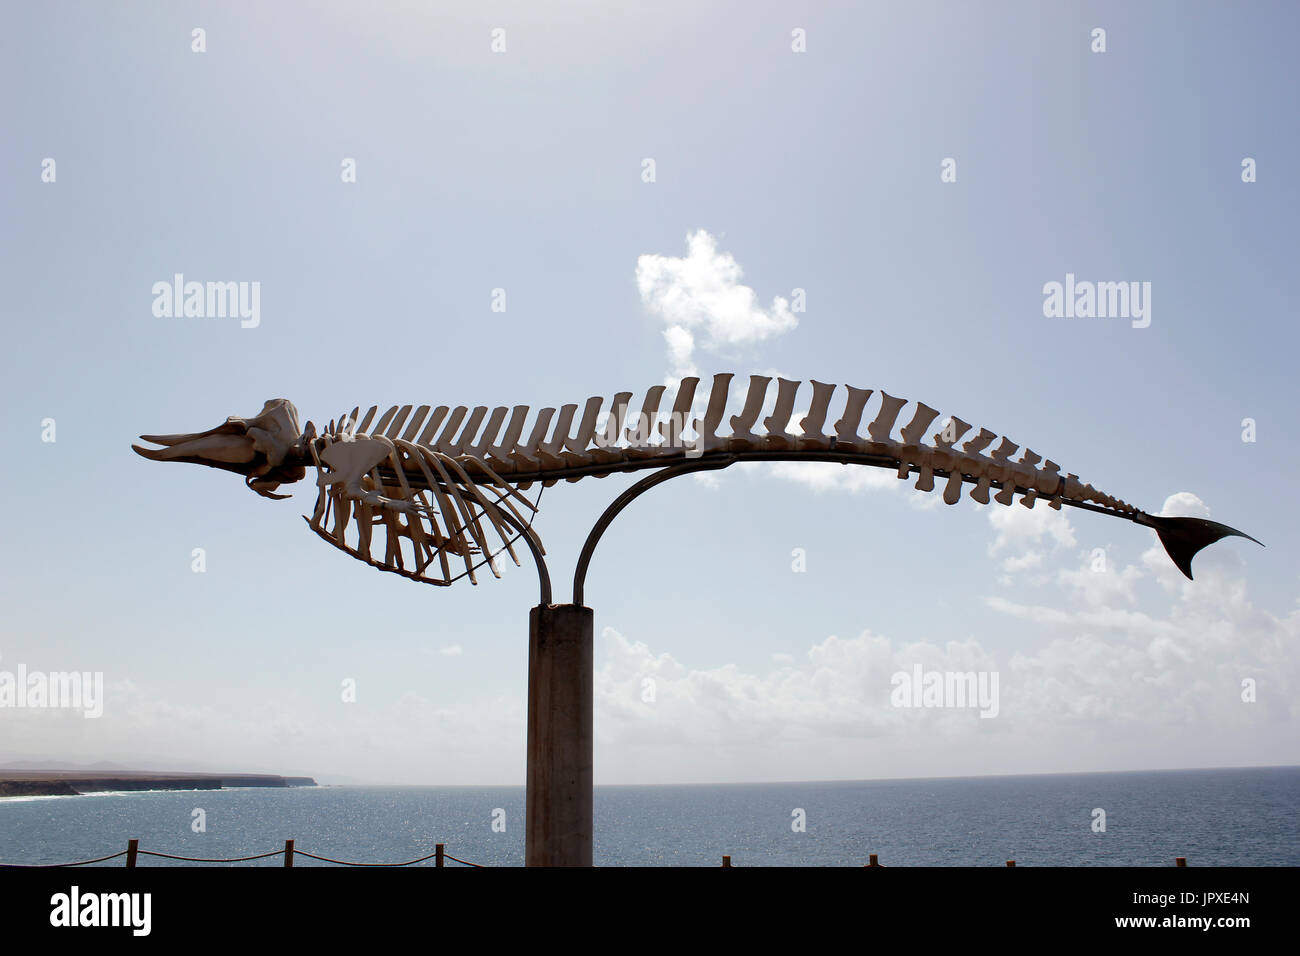 An adult female Cuvier's beaked whale skeleton at El Cotillo, Fuerteventura, Canary Islands, Spain Stock Photo